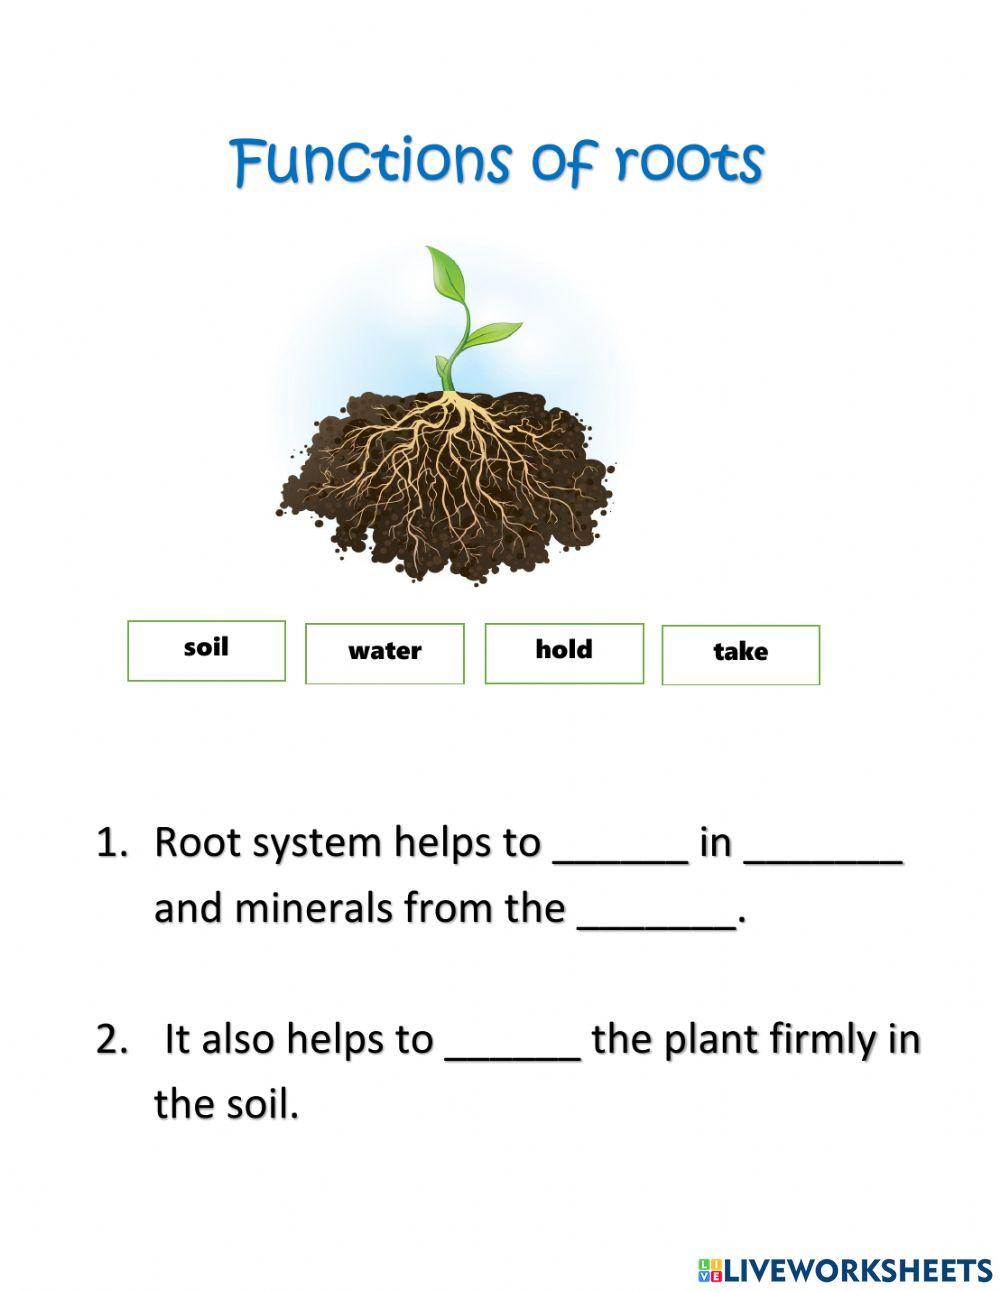 Functions of the root